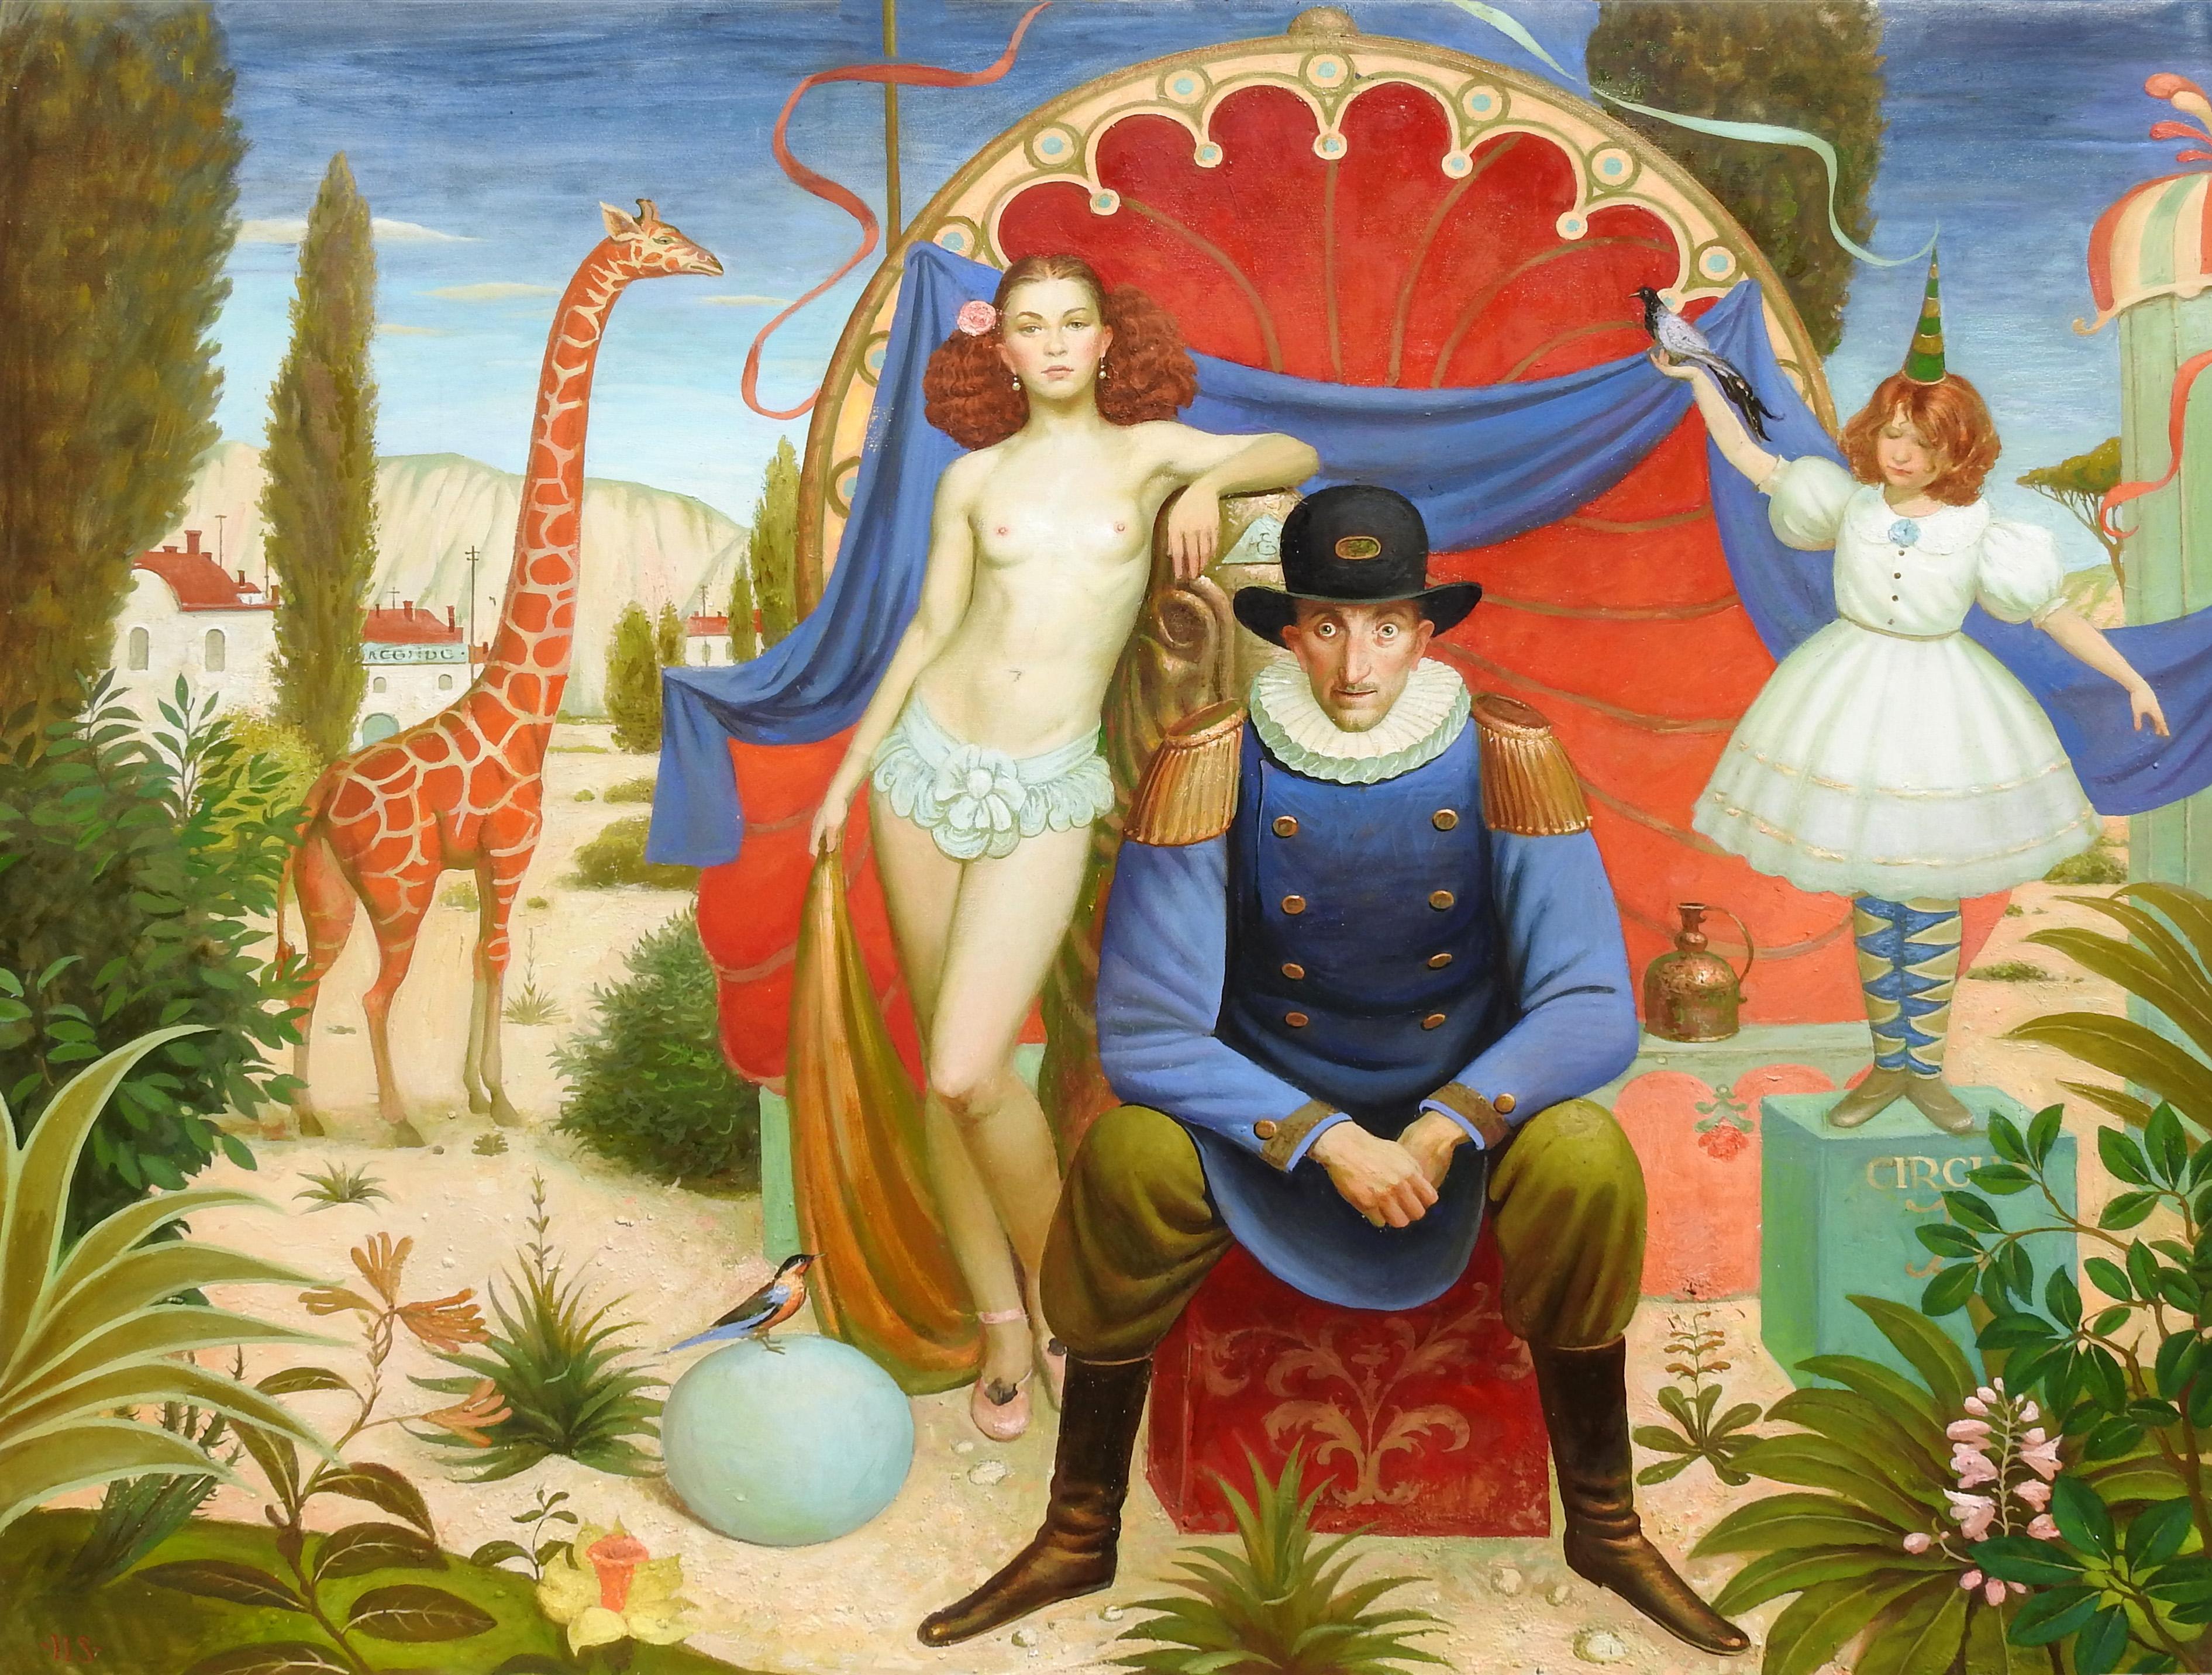 "The Carnival is Over: Afternoon" by Igor Samsonov is an Oil on Canvas painting measuring 47.5x54.5 and is a prime colorful example of figurative surrealism at its finest. His deep blue and orange color pallet helps set the mood of the story he is